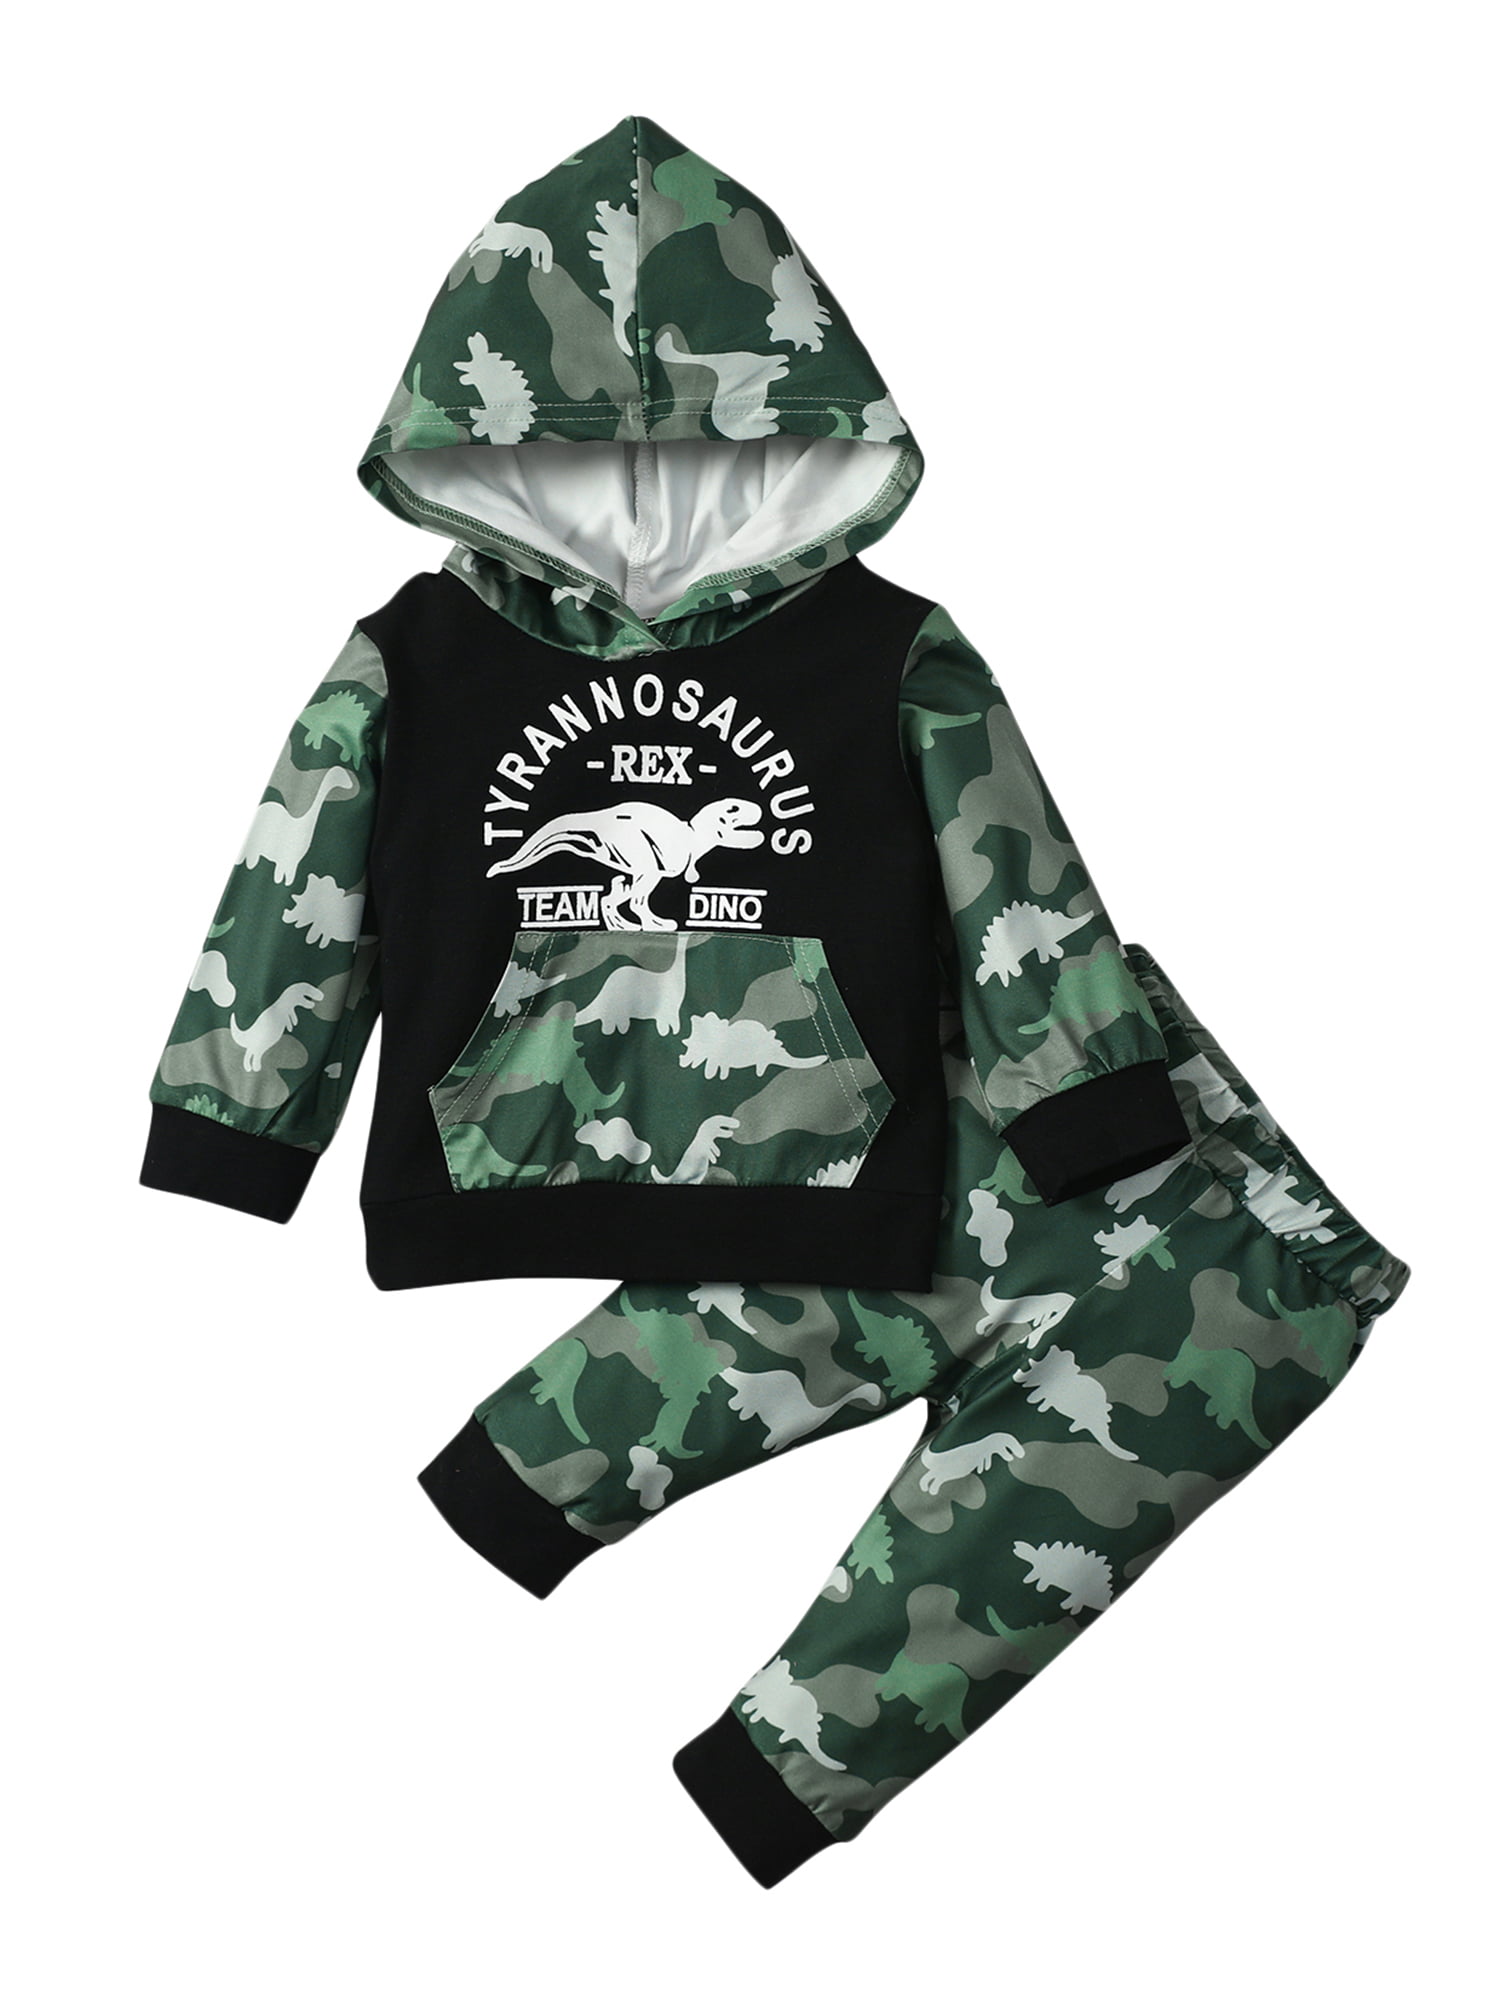 Toddler Infant Baby Boy Kid Camo Hoodie Long Pants Outfits Clothes Set Tracksuit 